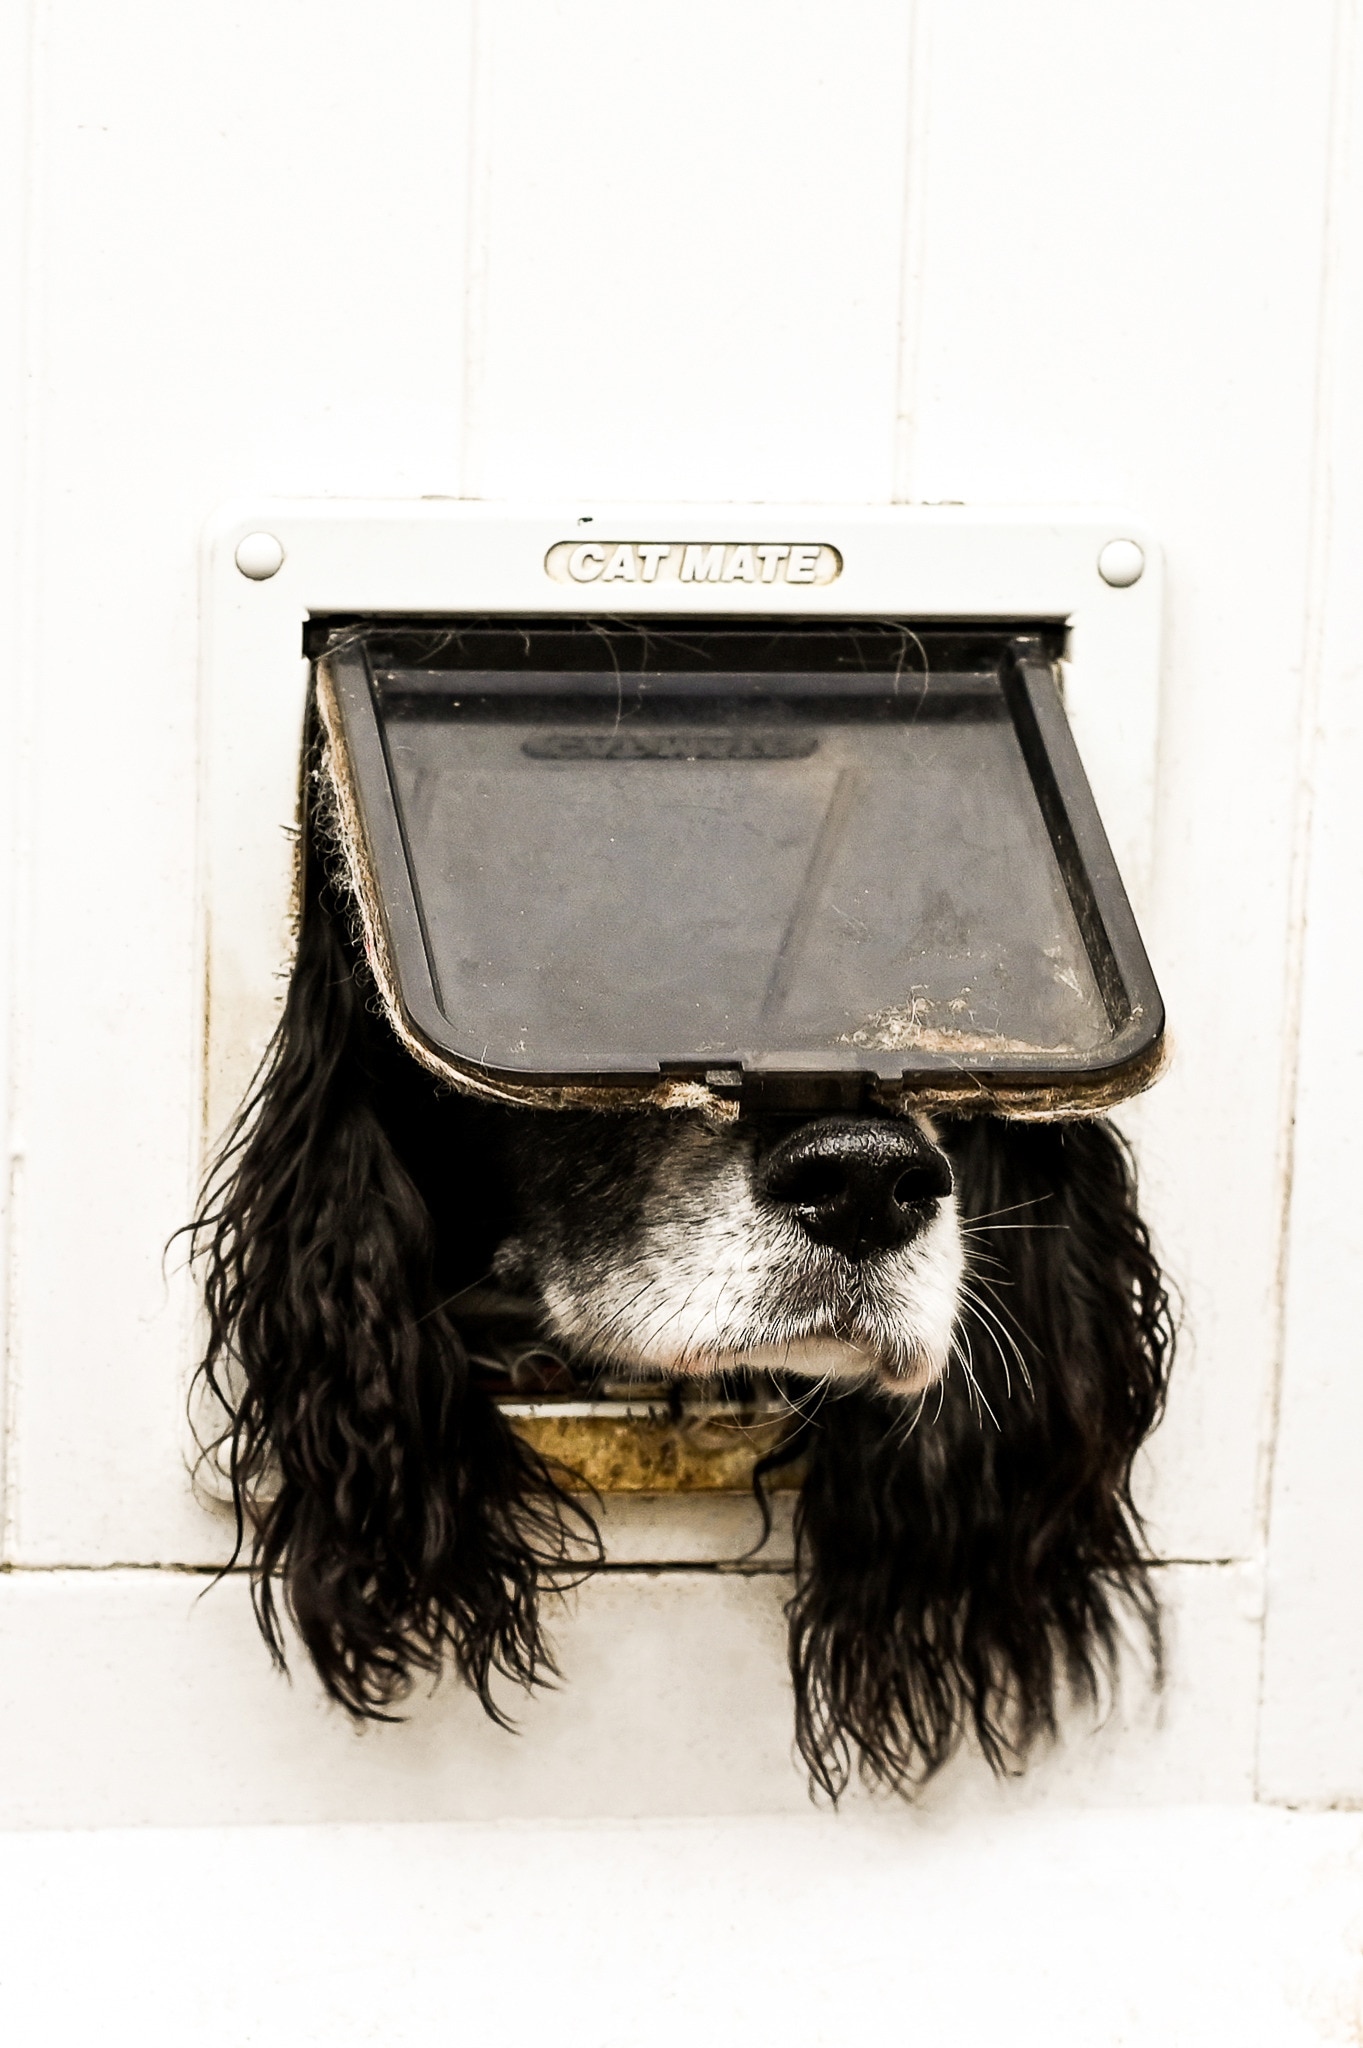 A white and black dog trying to poke its head out of a cat flap